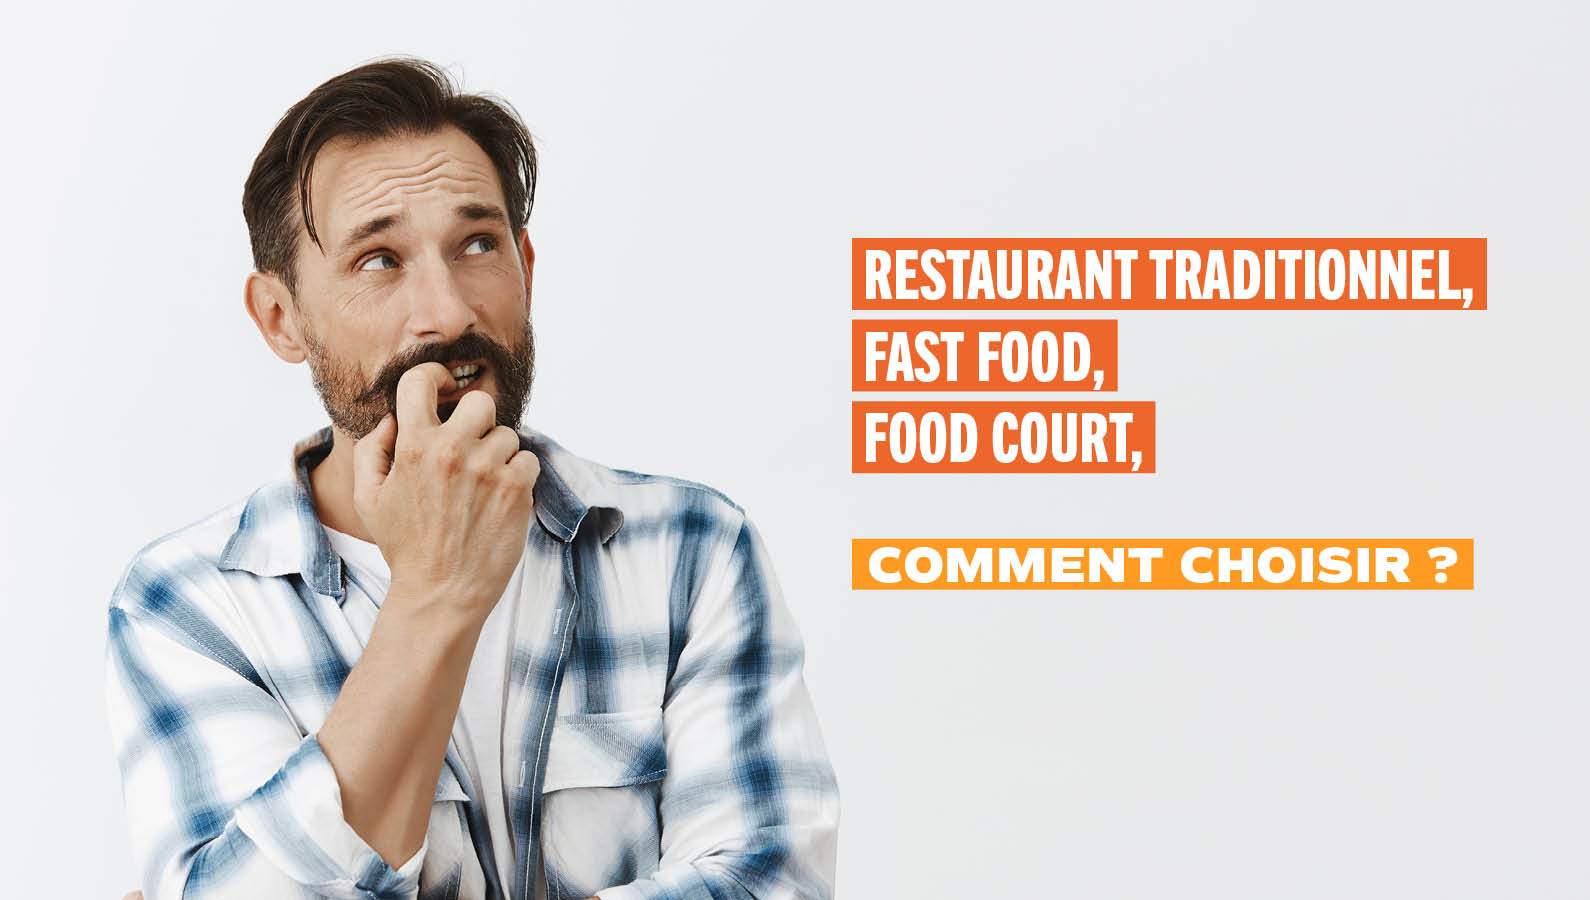 Restaurant traditionnel, fast food ou food court, comment choisir